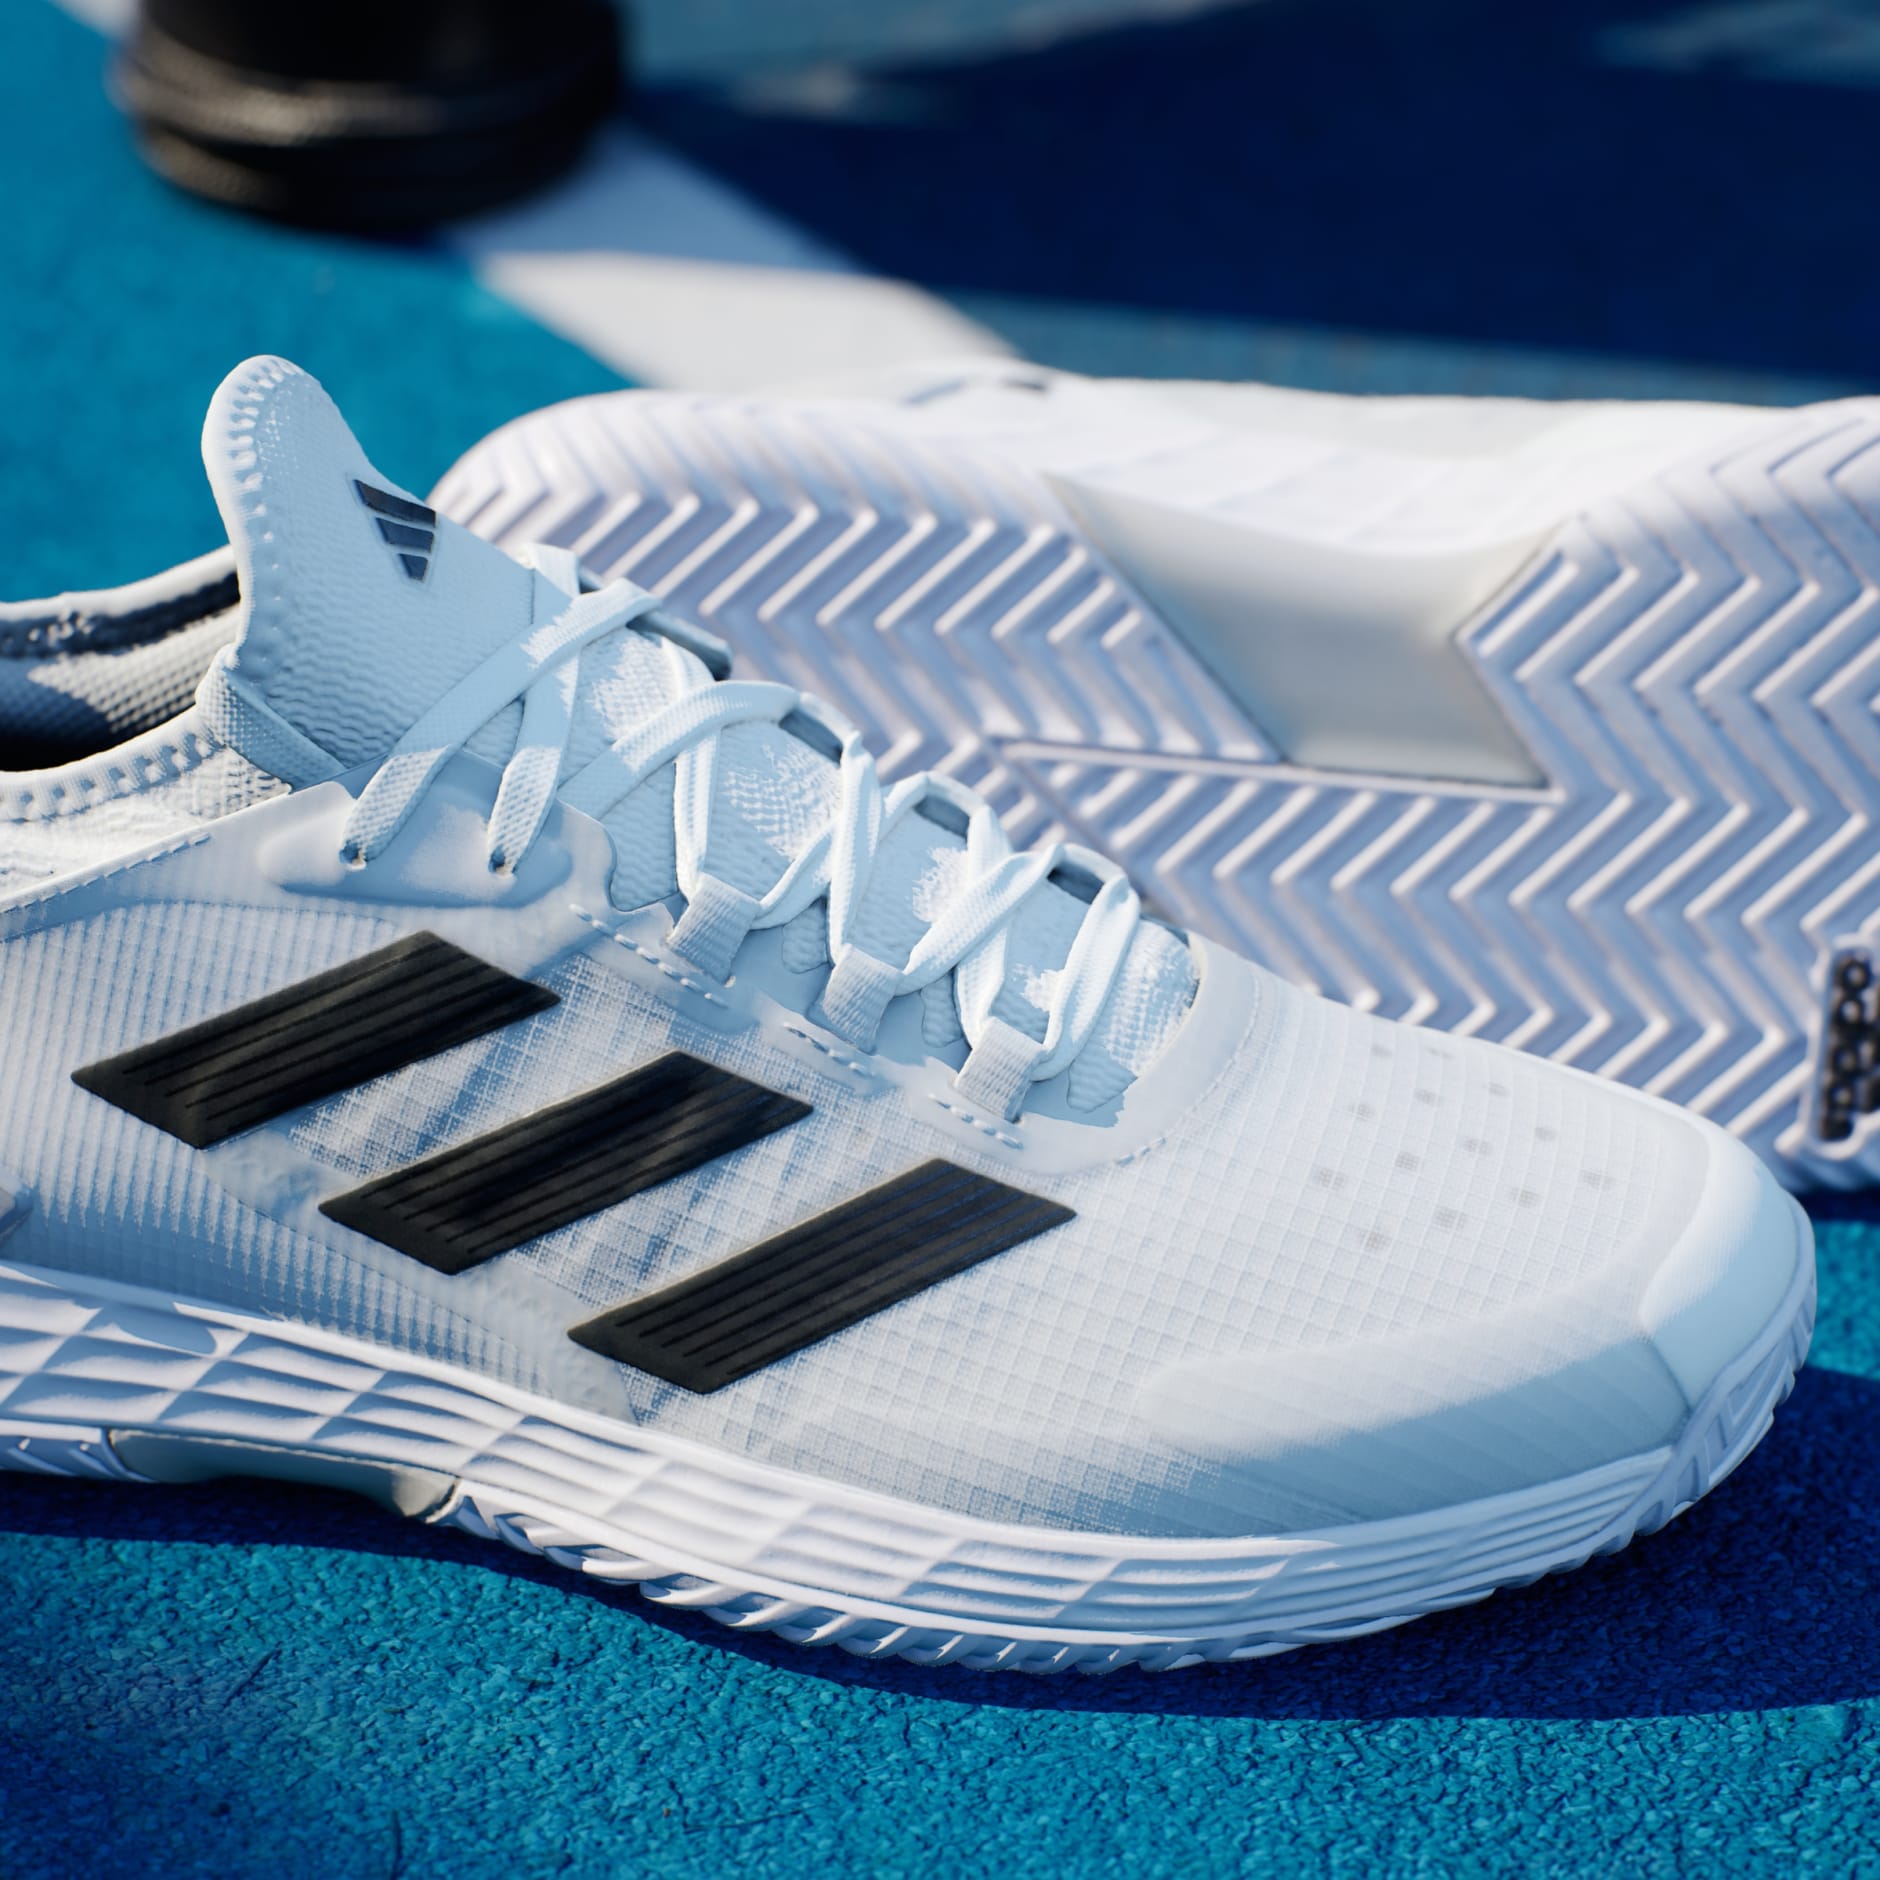 Shoes - Adizero Ubersonic 4.1 Tennis Shoes - White | adidas South Africa